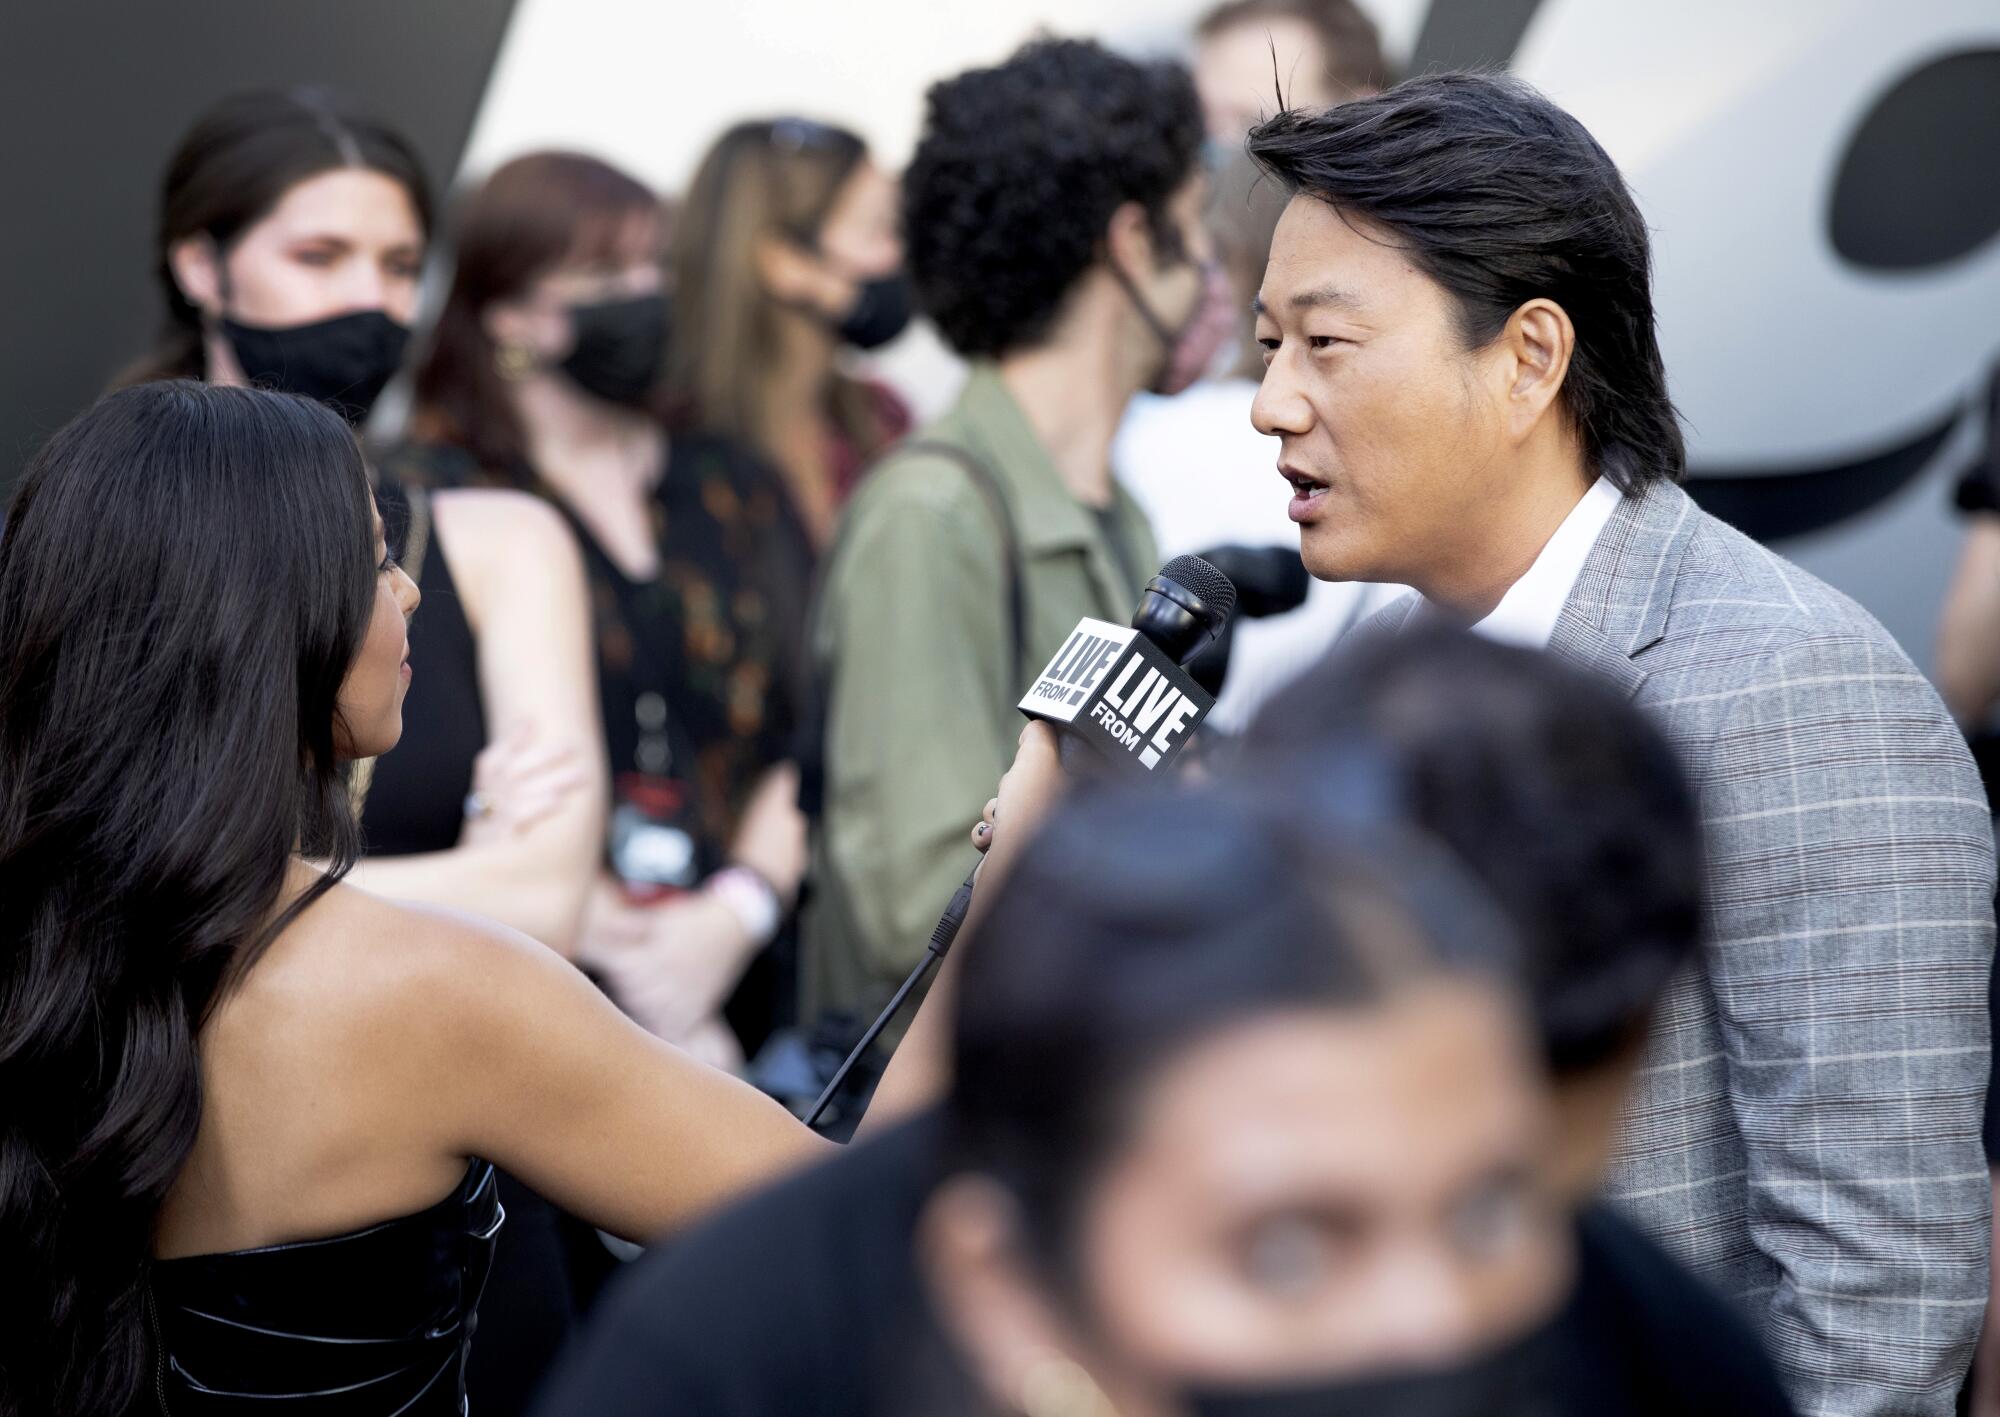 Sung Kang does an arrivals interview unmasked with a woman with a microphone